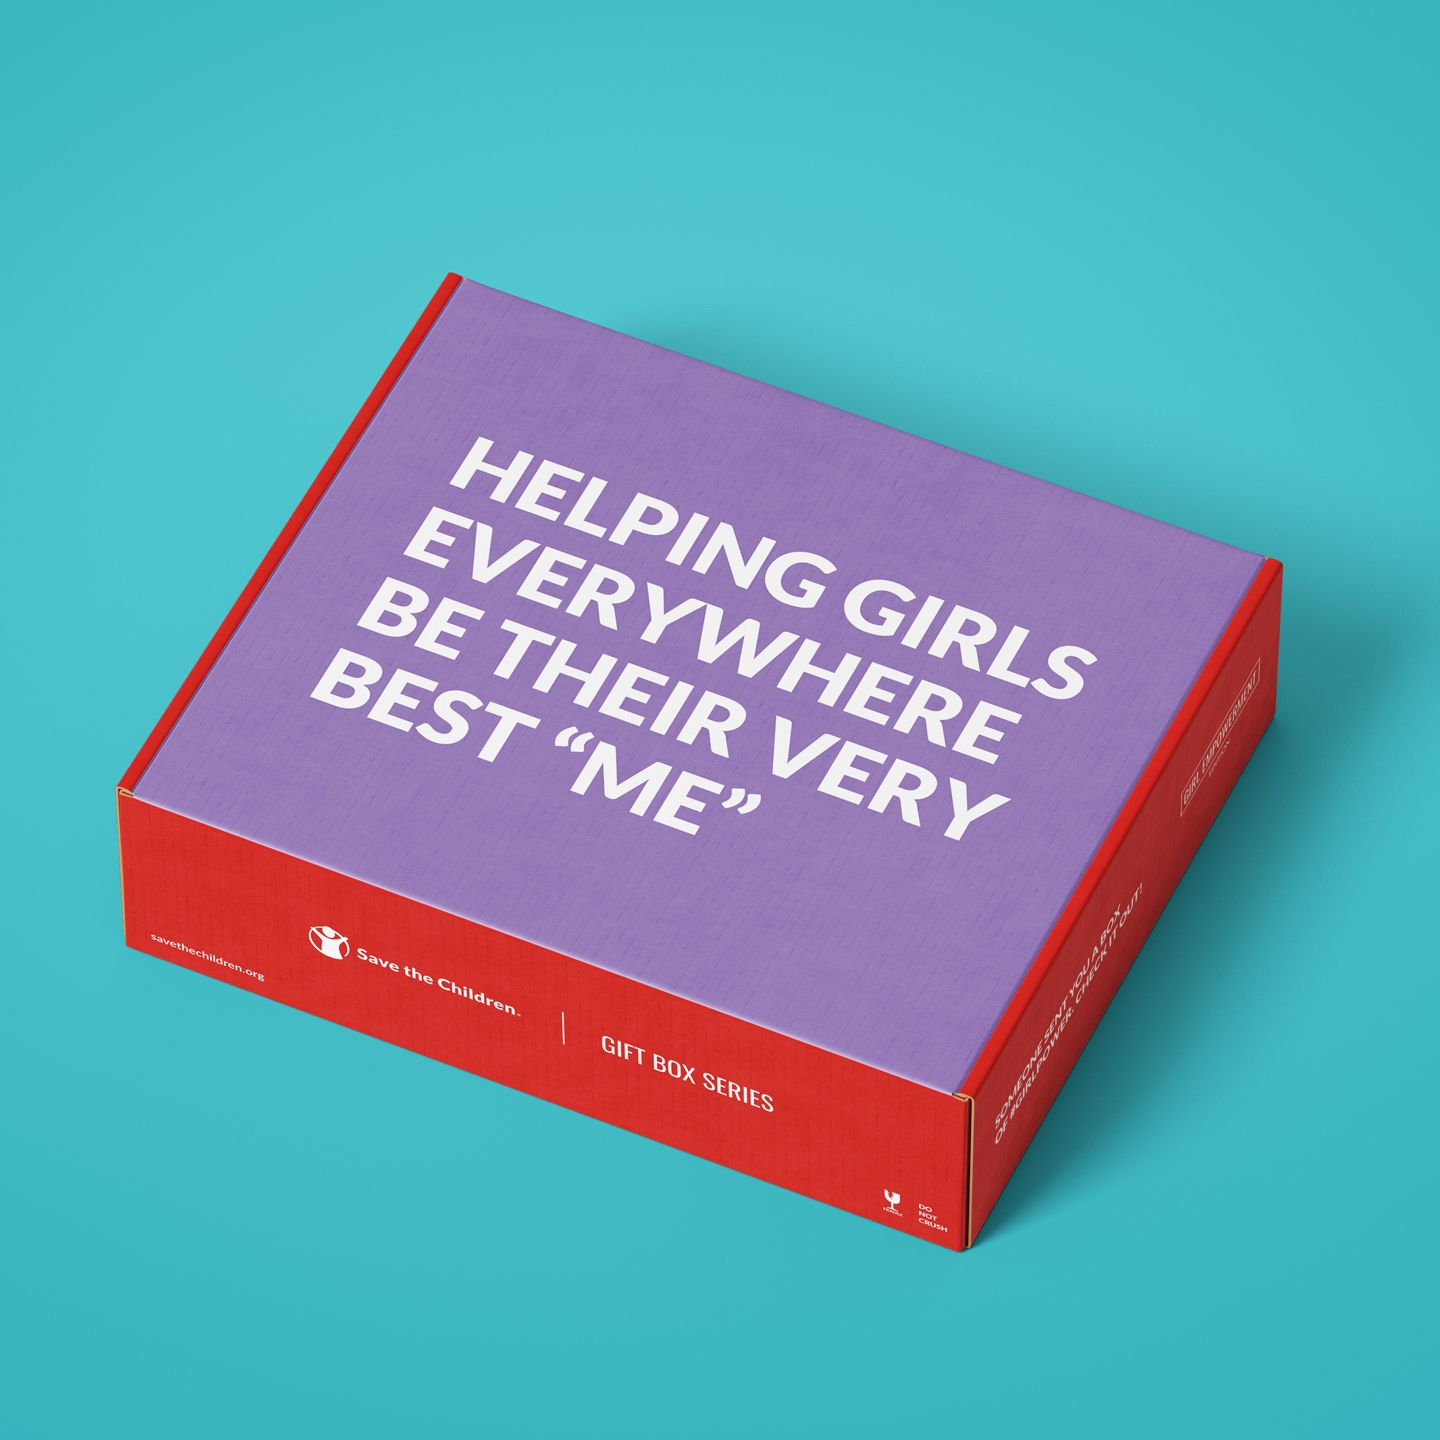 New Girl's Empowerment gift boxs from Save the Children